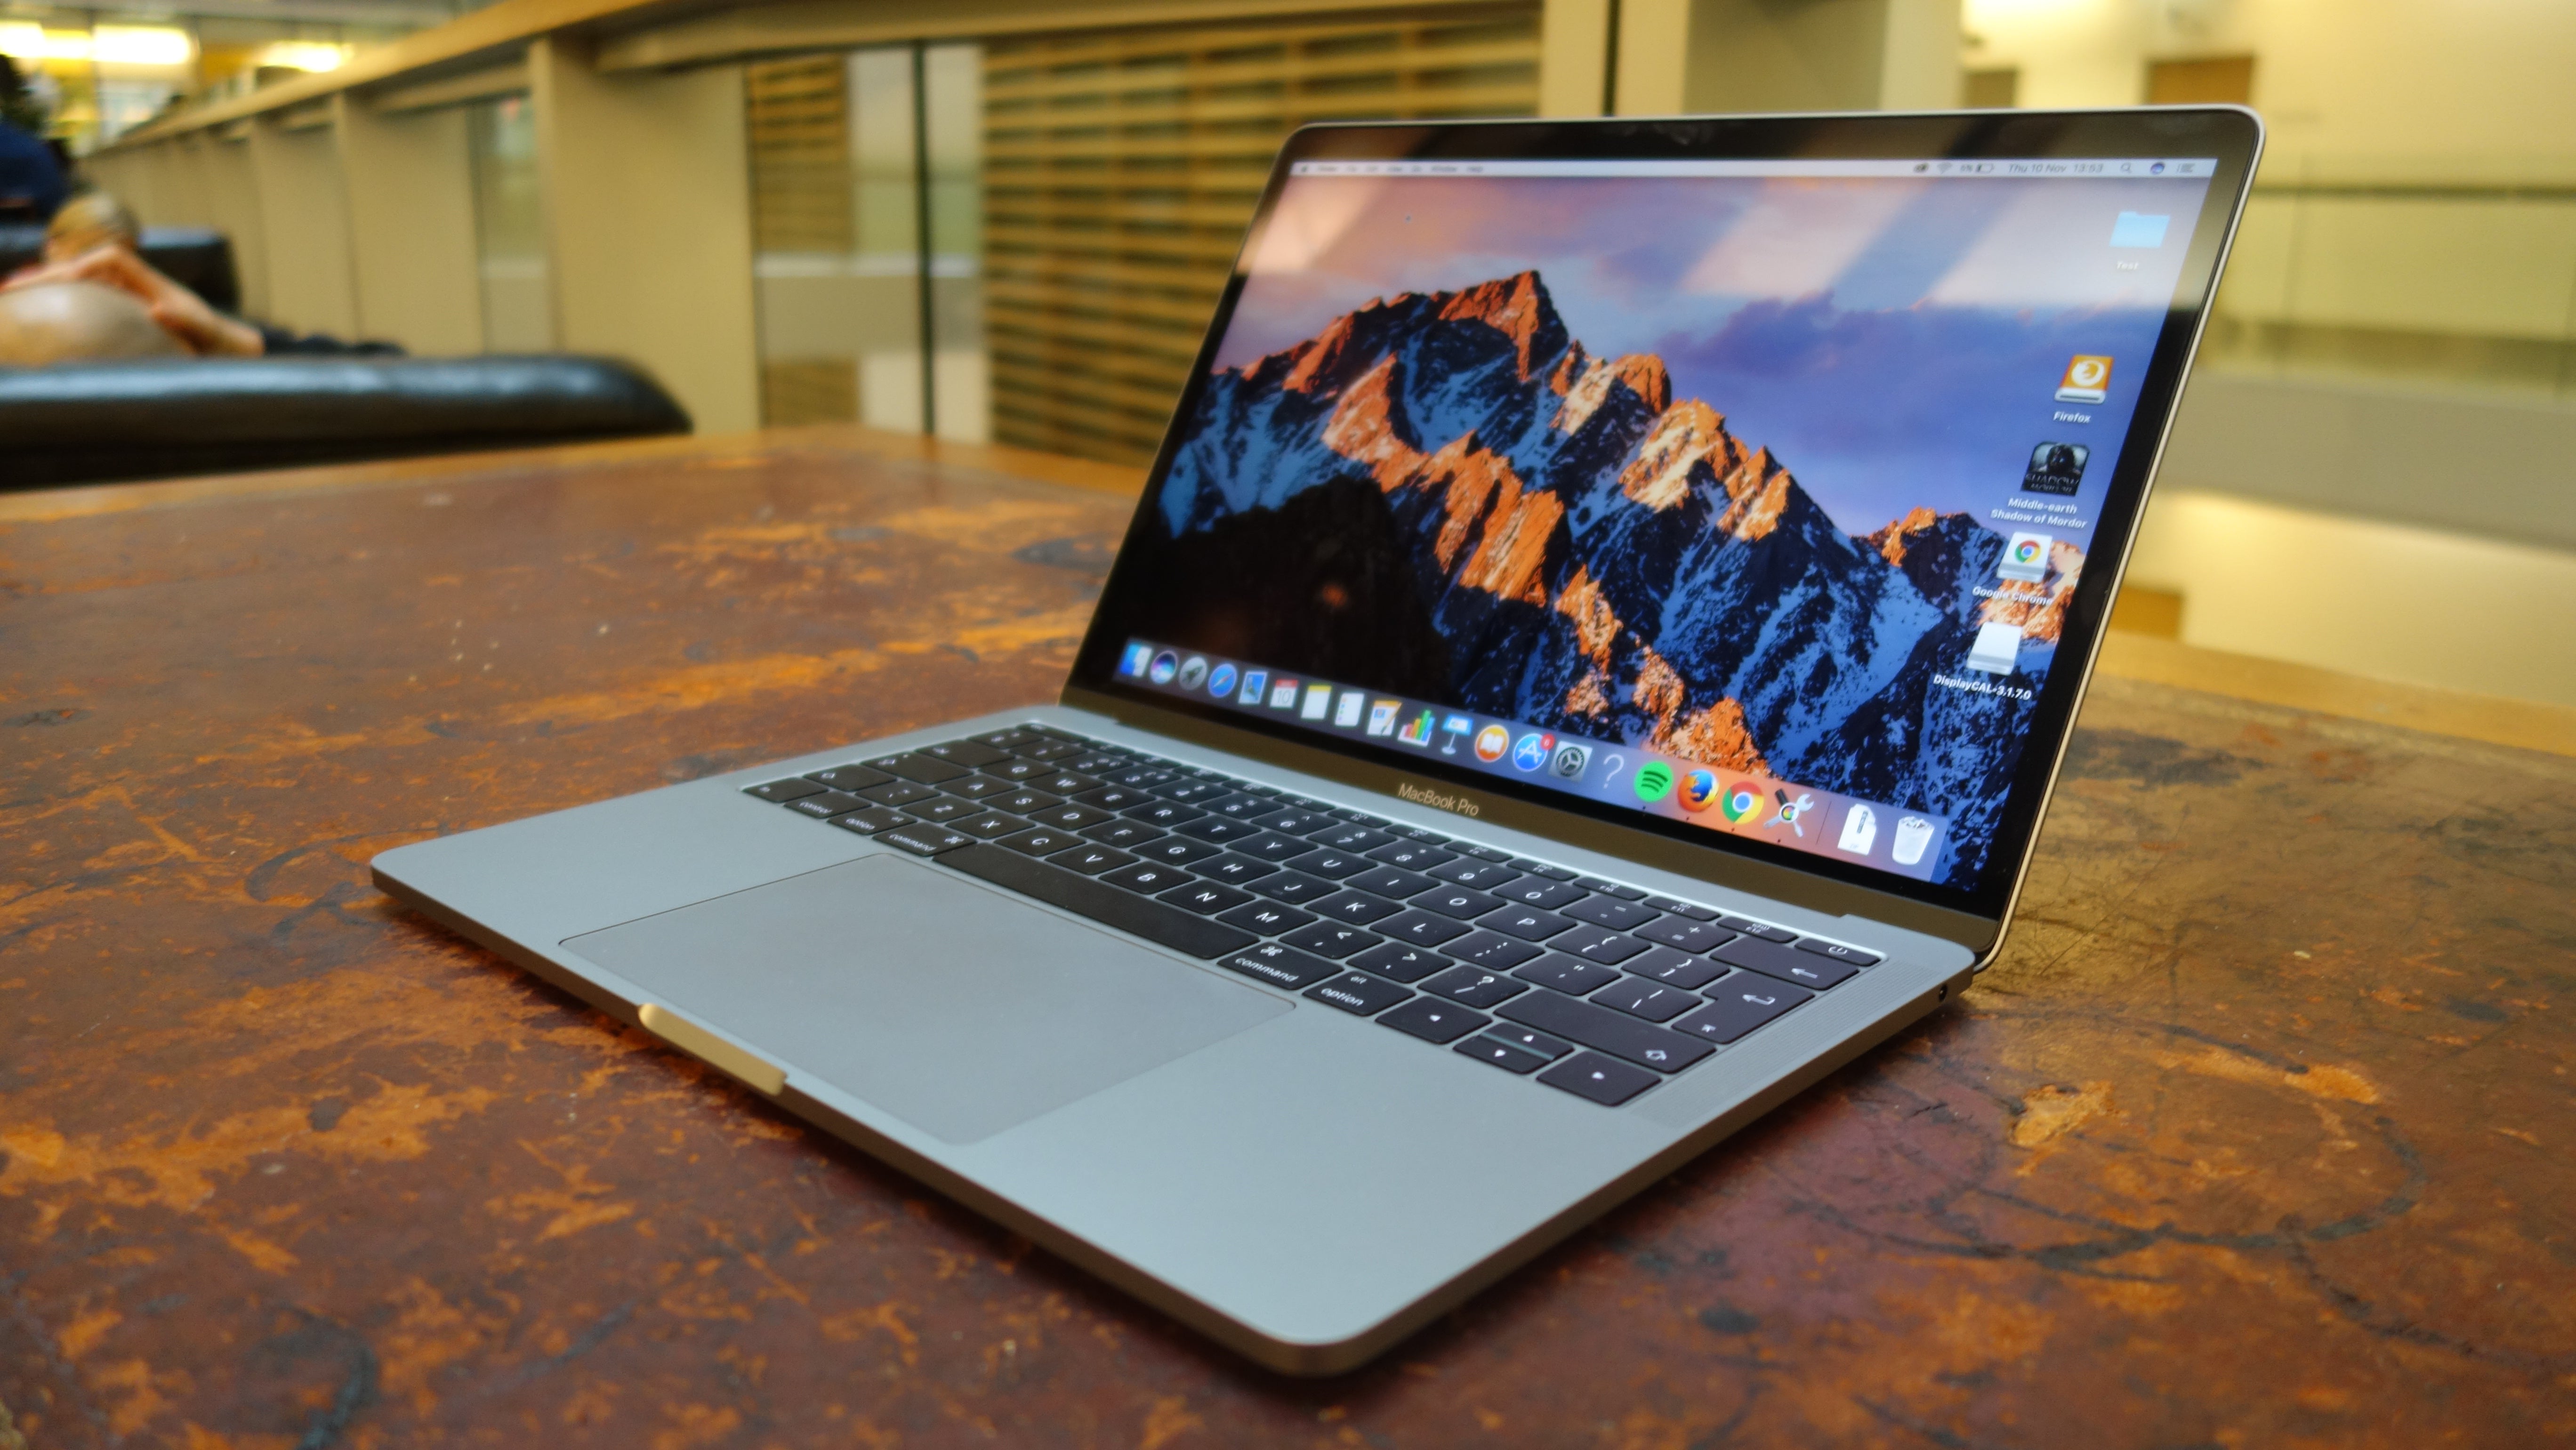 13 inch macbook pro with retina di play review 2016 enforcers arcane